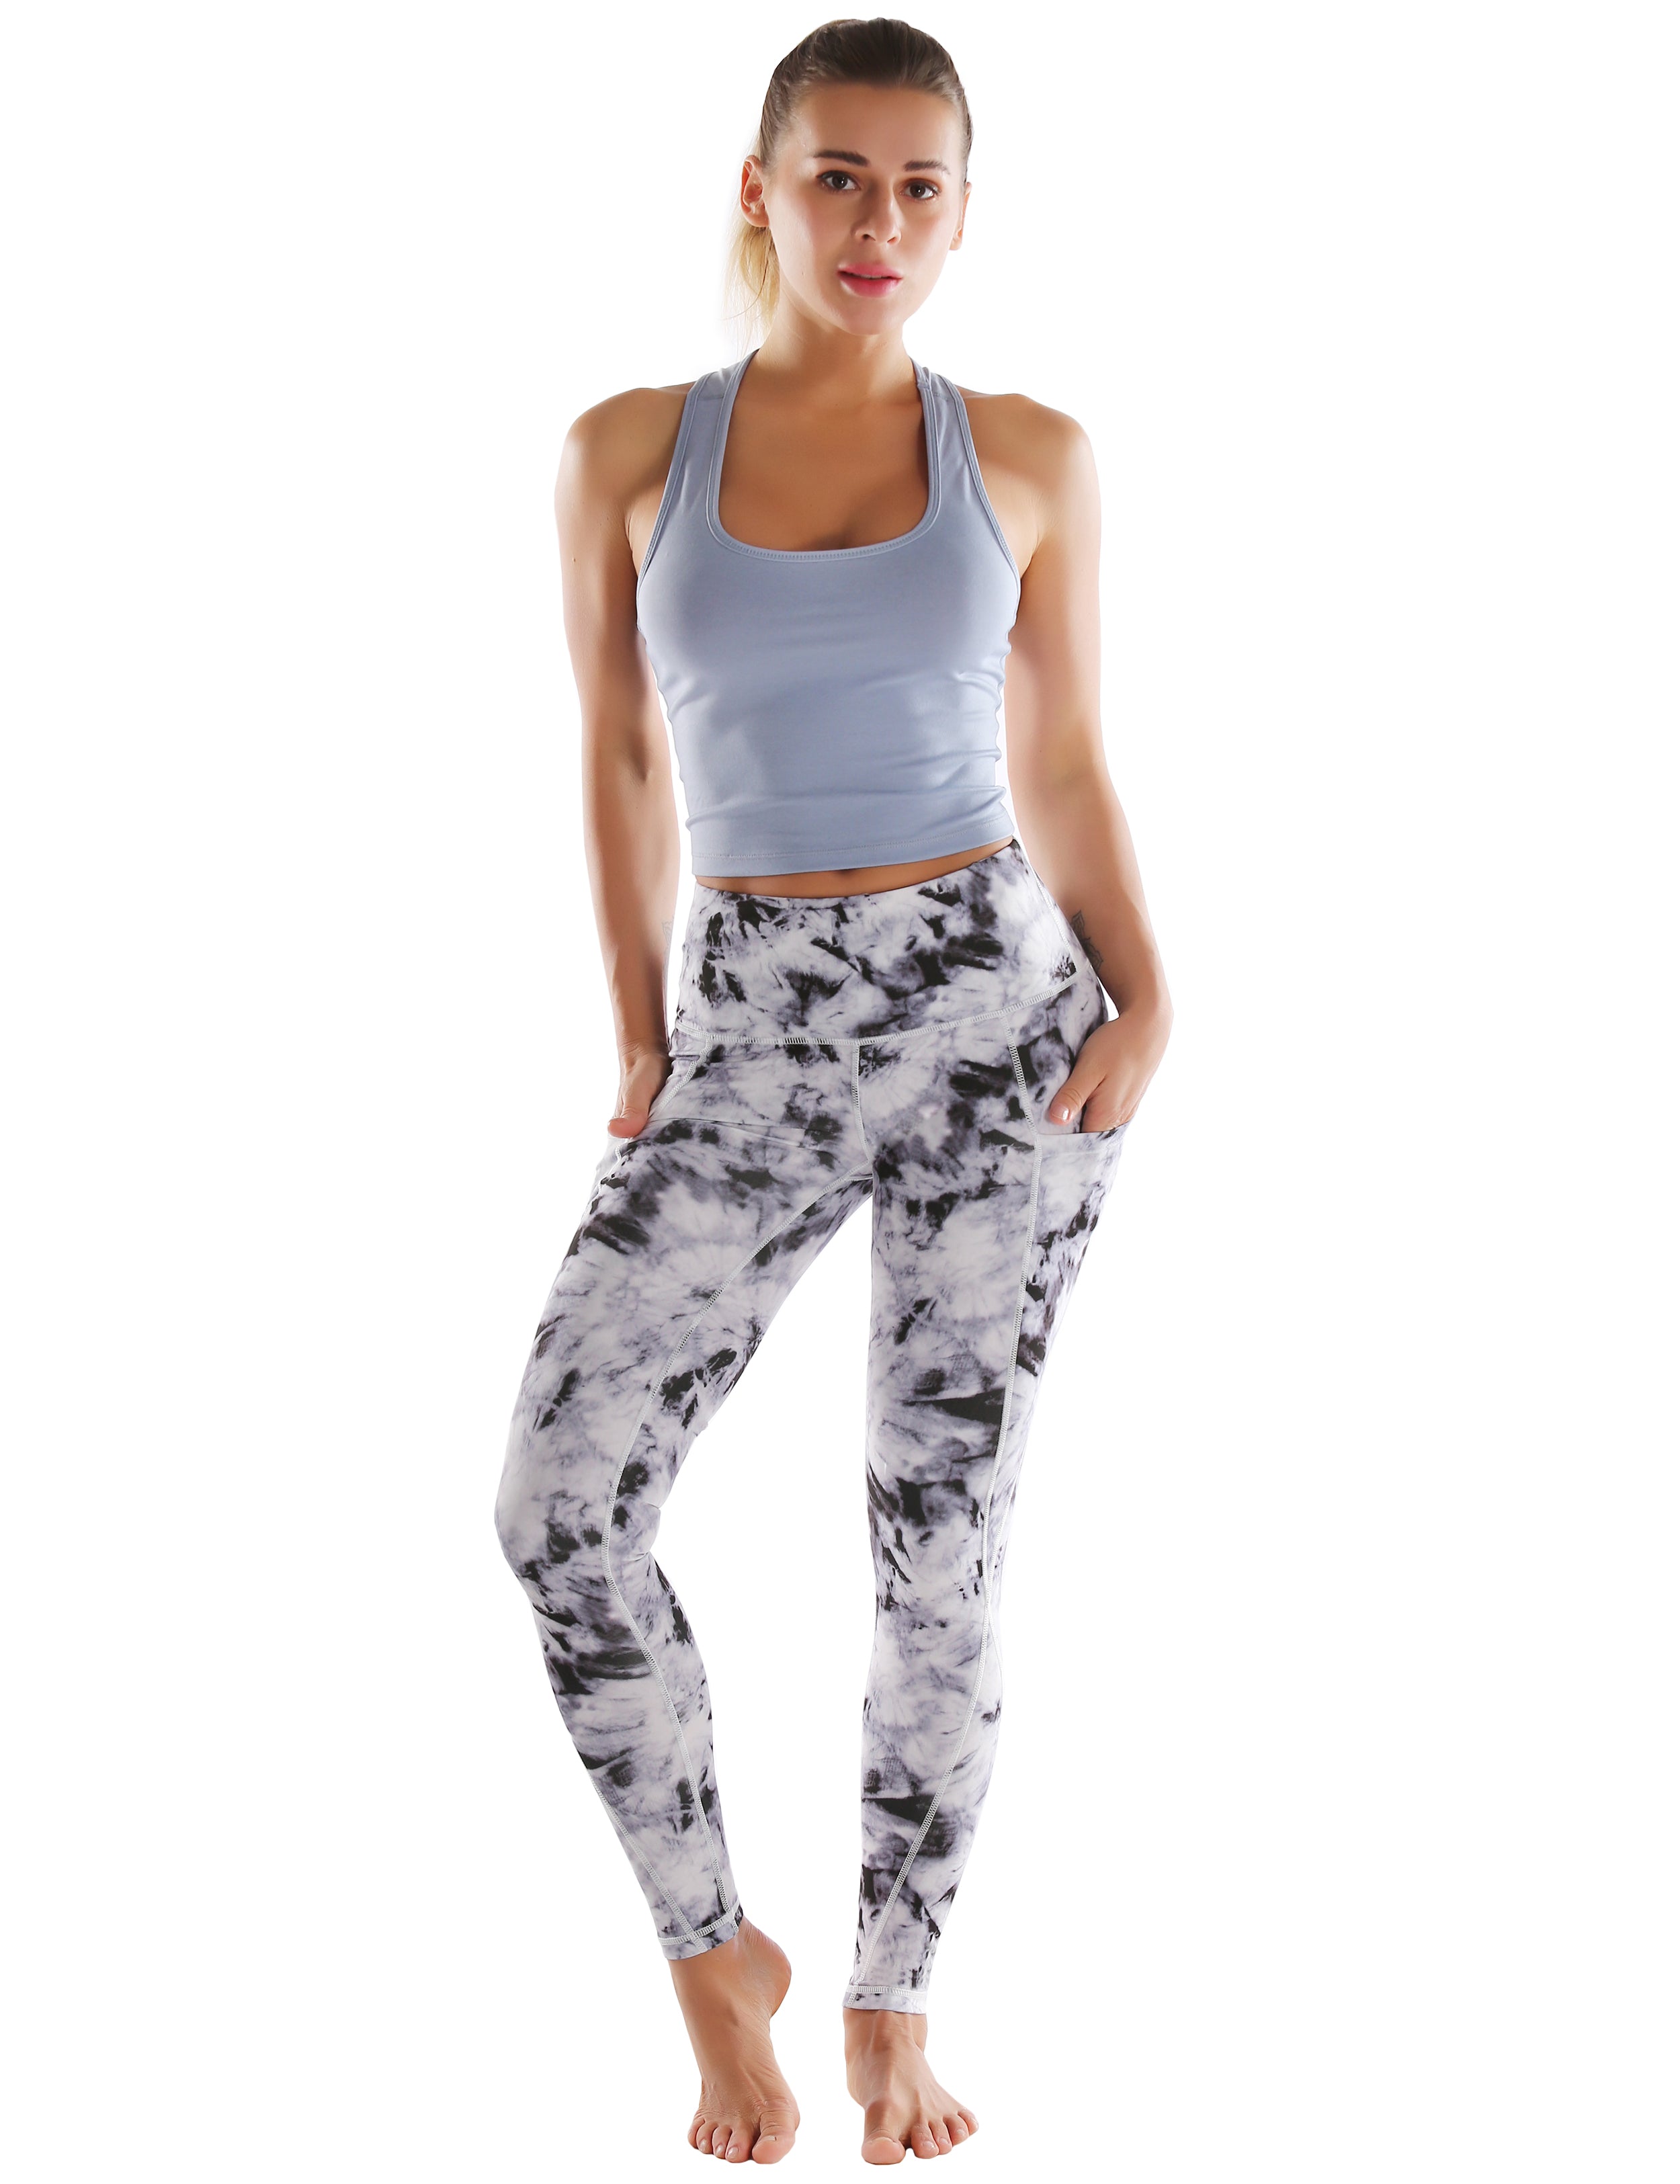 High Waist Side Pockets Jogging Pants blackdandelion 78%Polyester/22%Spandex Fabric doesn't attract lint easily 4-way stretch No see-through Moisture-wicking Tummy control Inner pocket